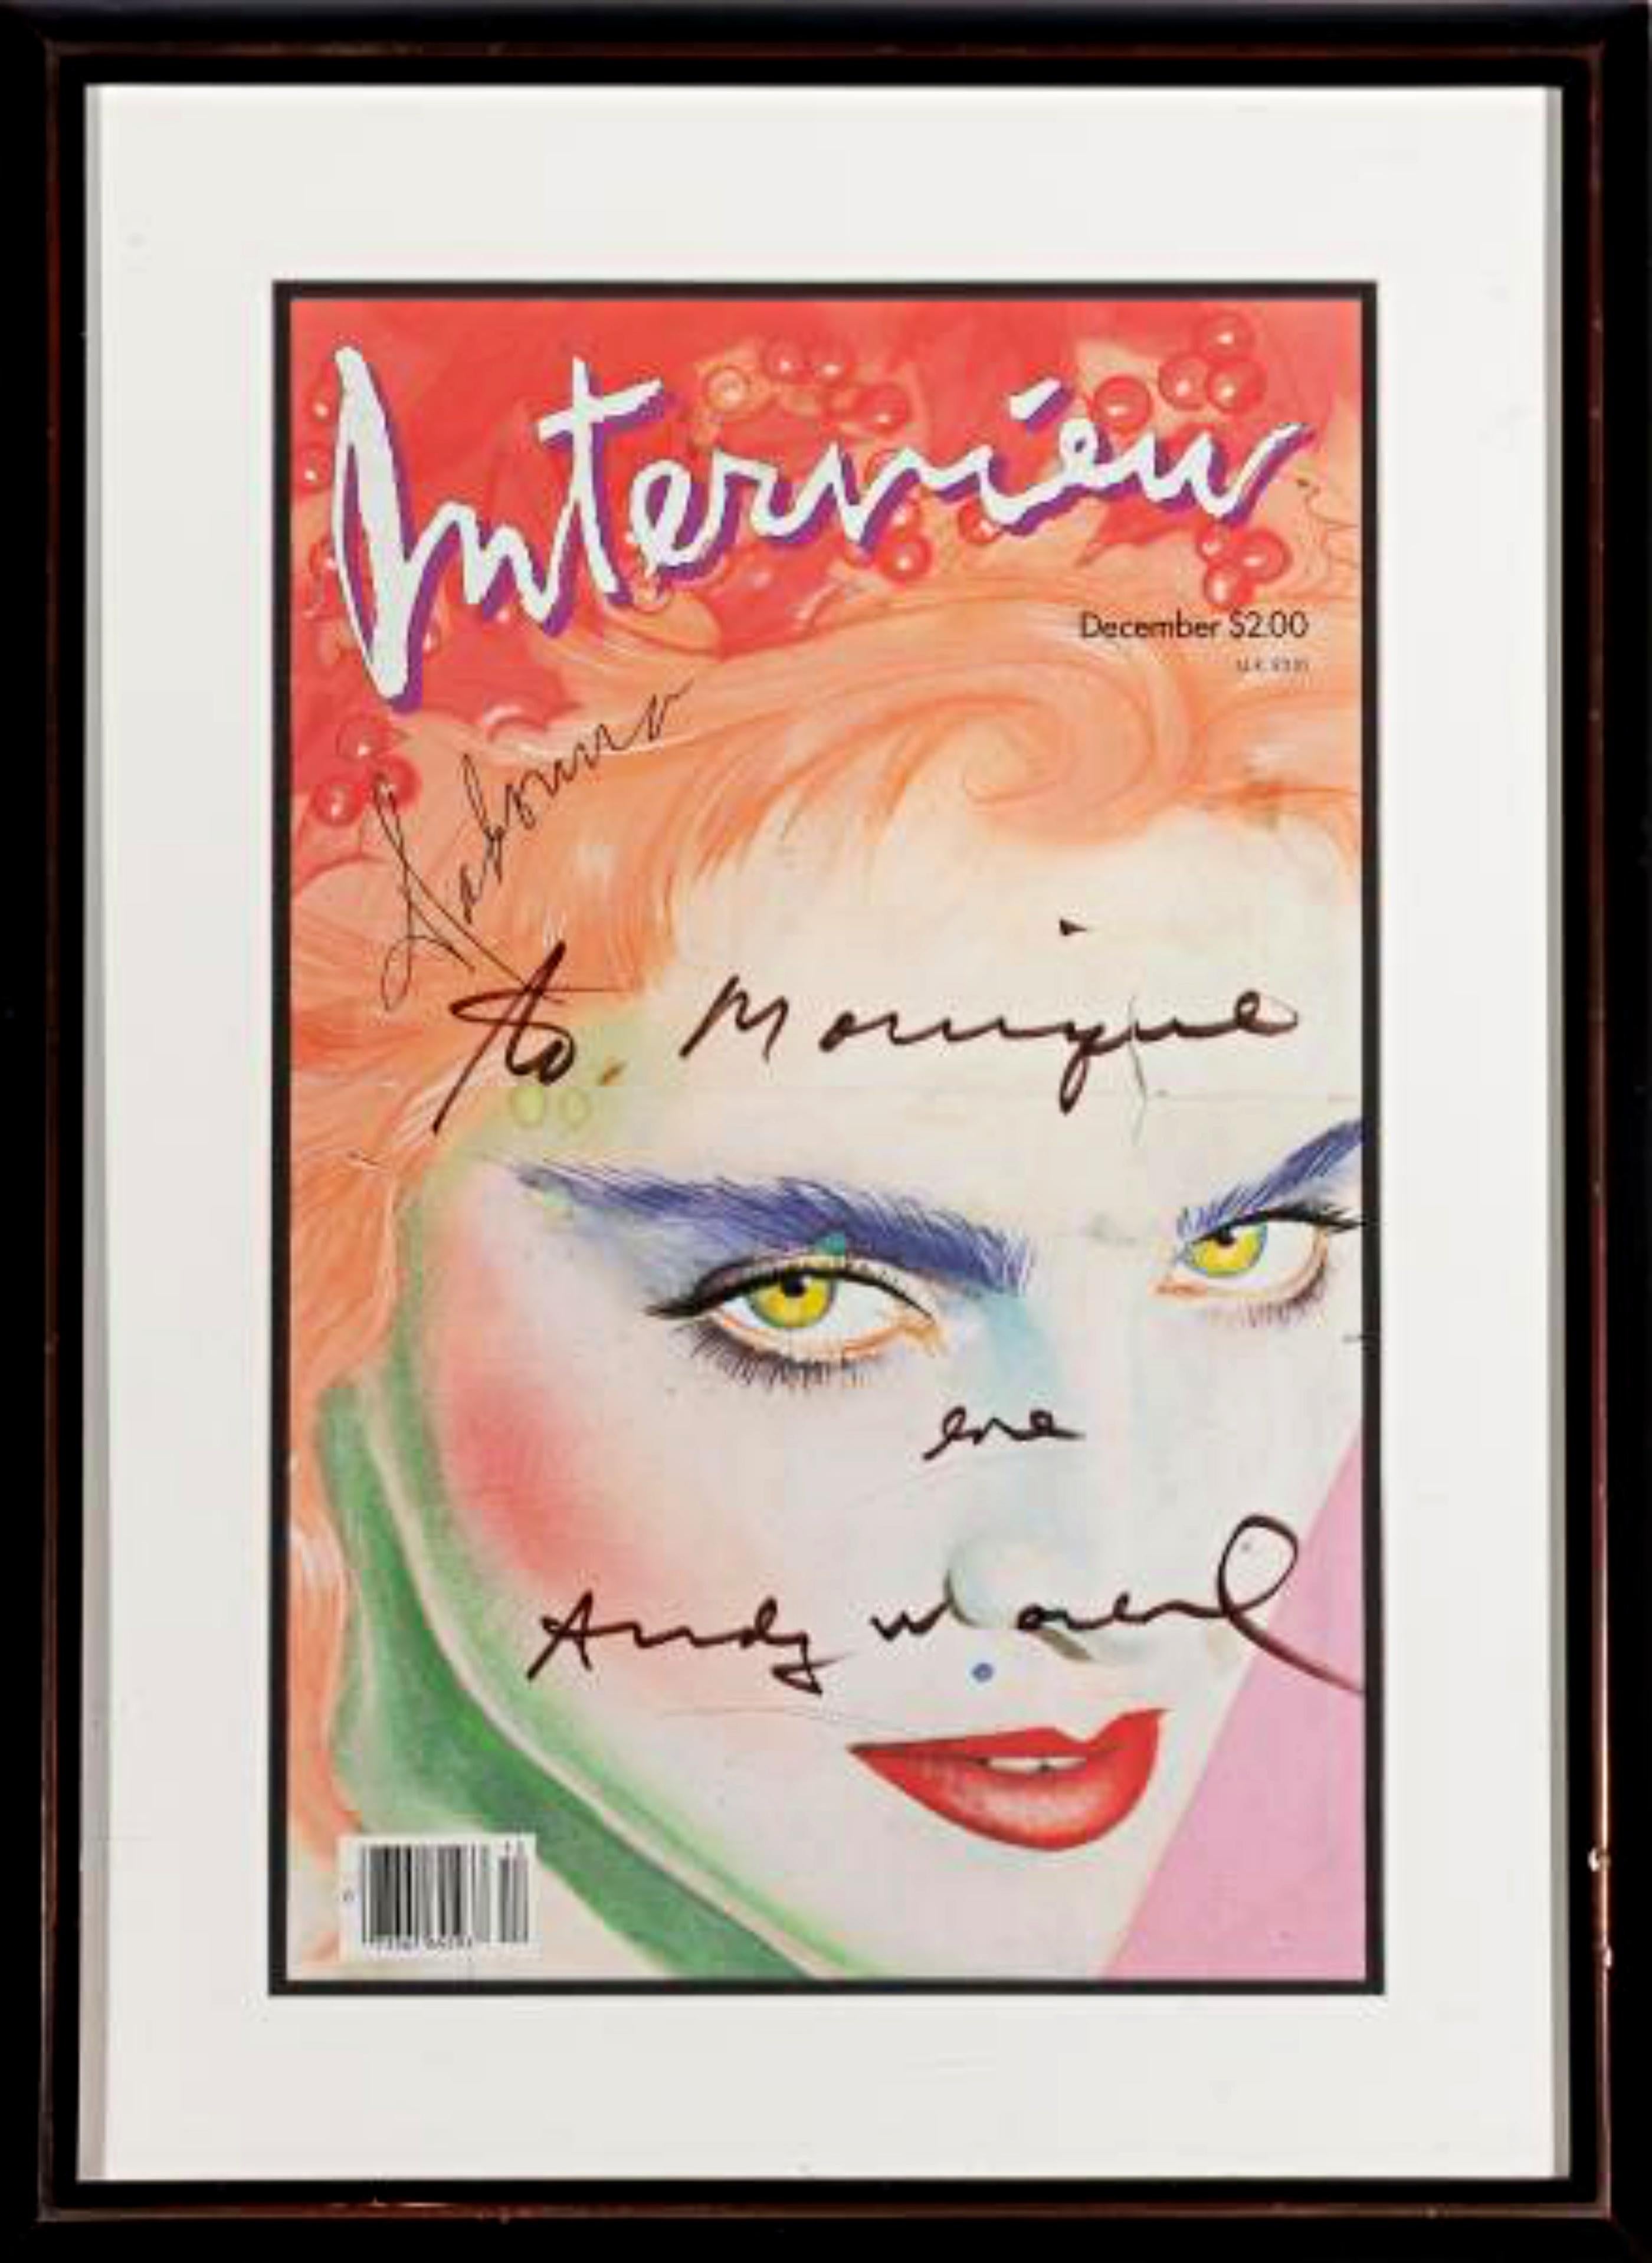 Andy Warhol Portrait Print - Interview Cover (Signed and inscribed by Warhol to socialite Monique Van Vooren)